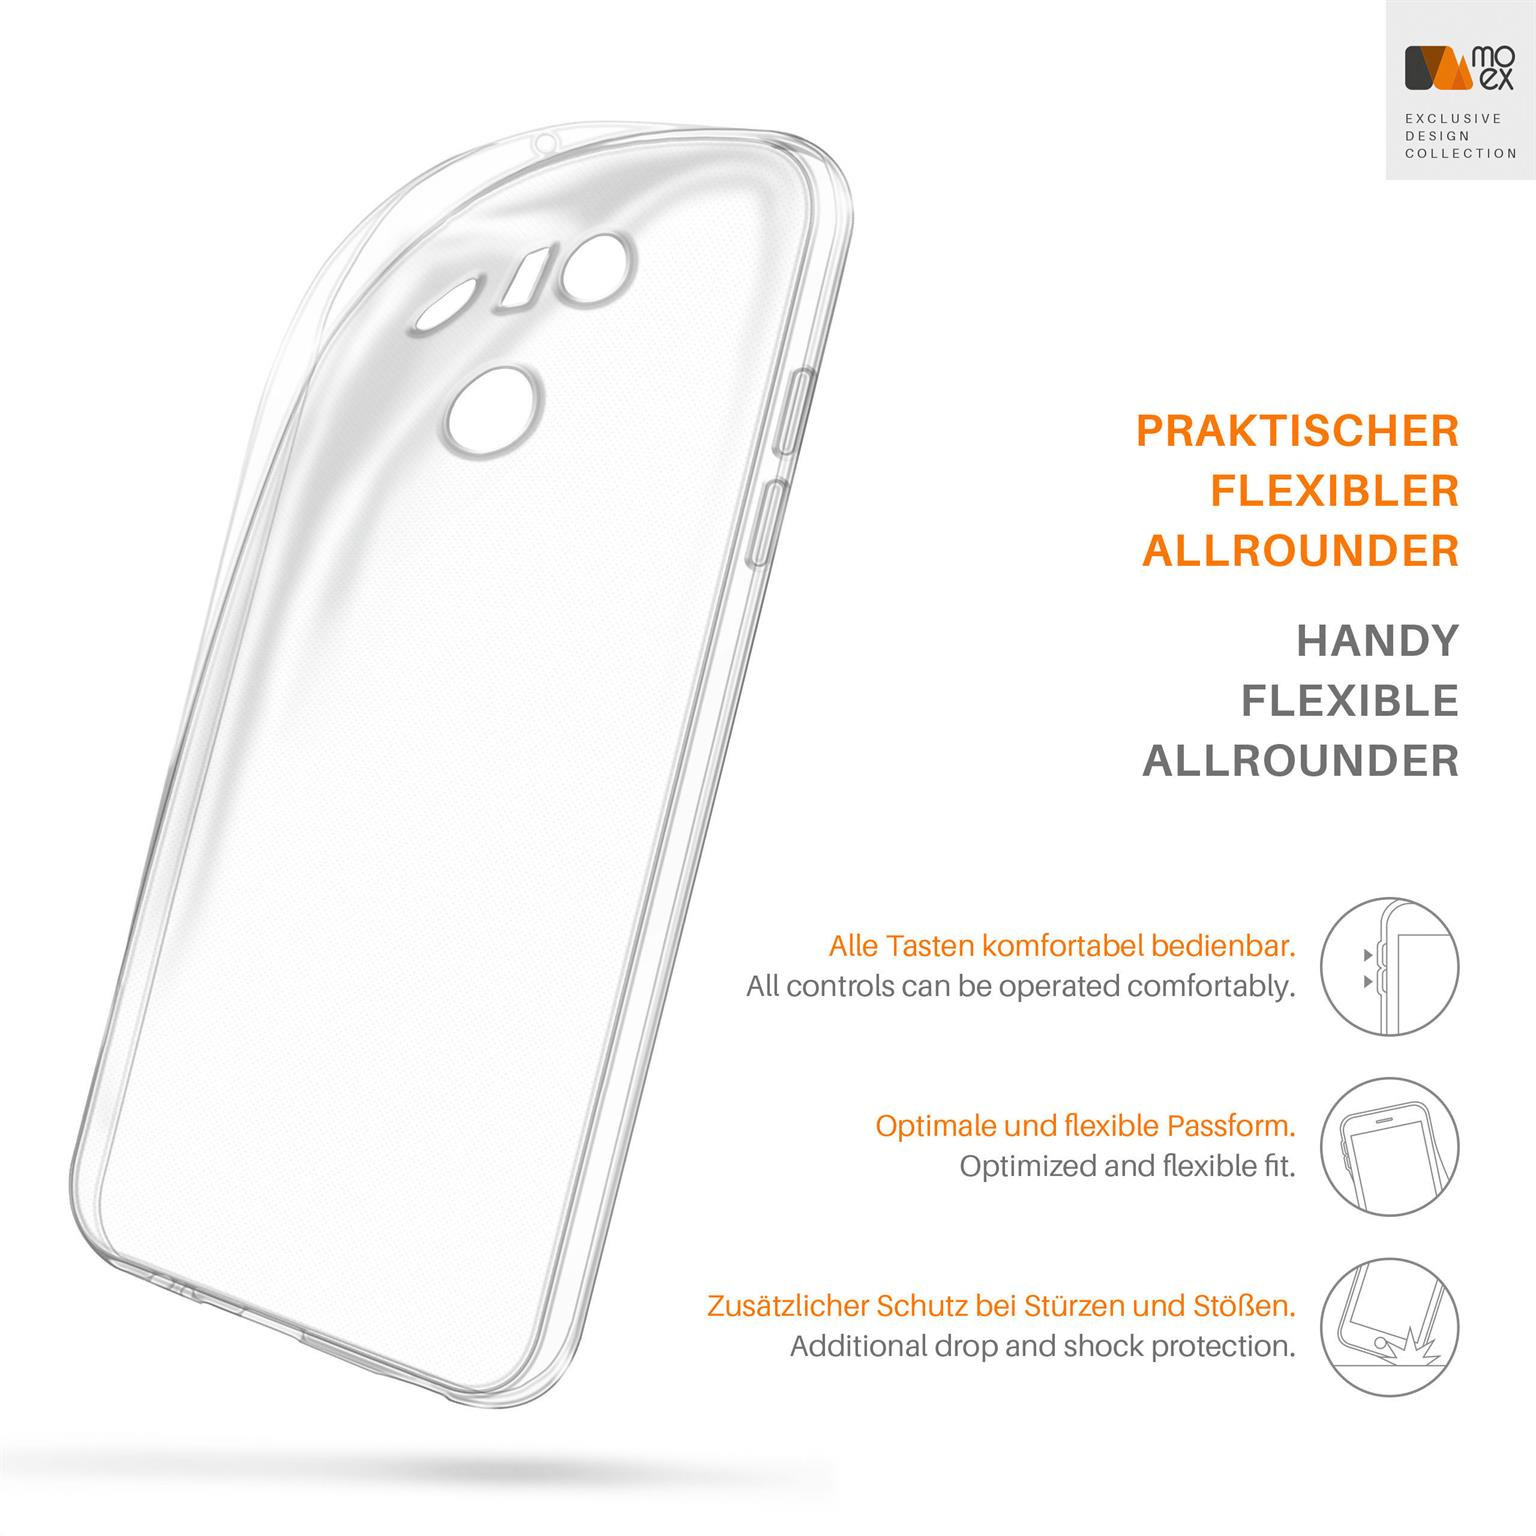 MOEX Case, G6, Aero LG, Crystal-Clear Backcover,